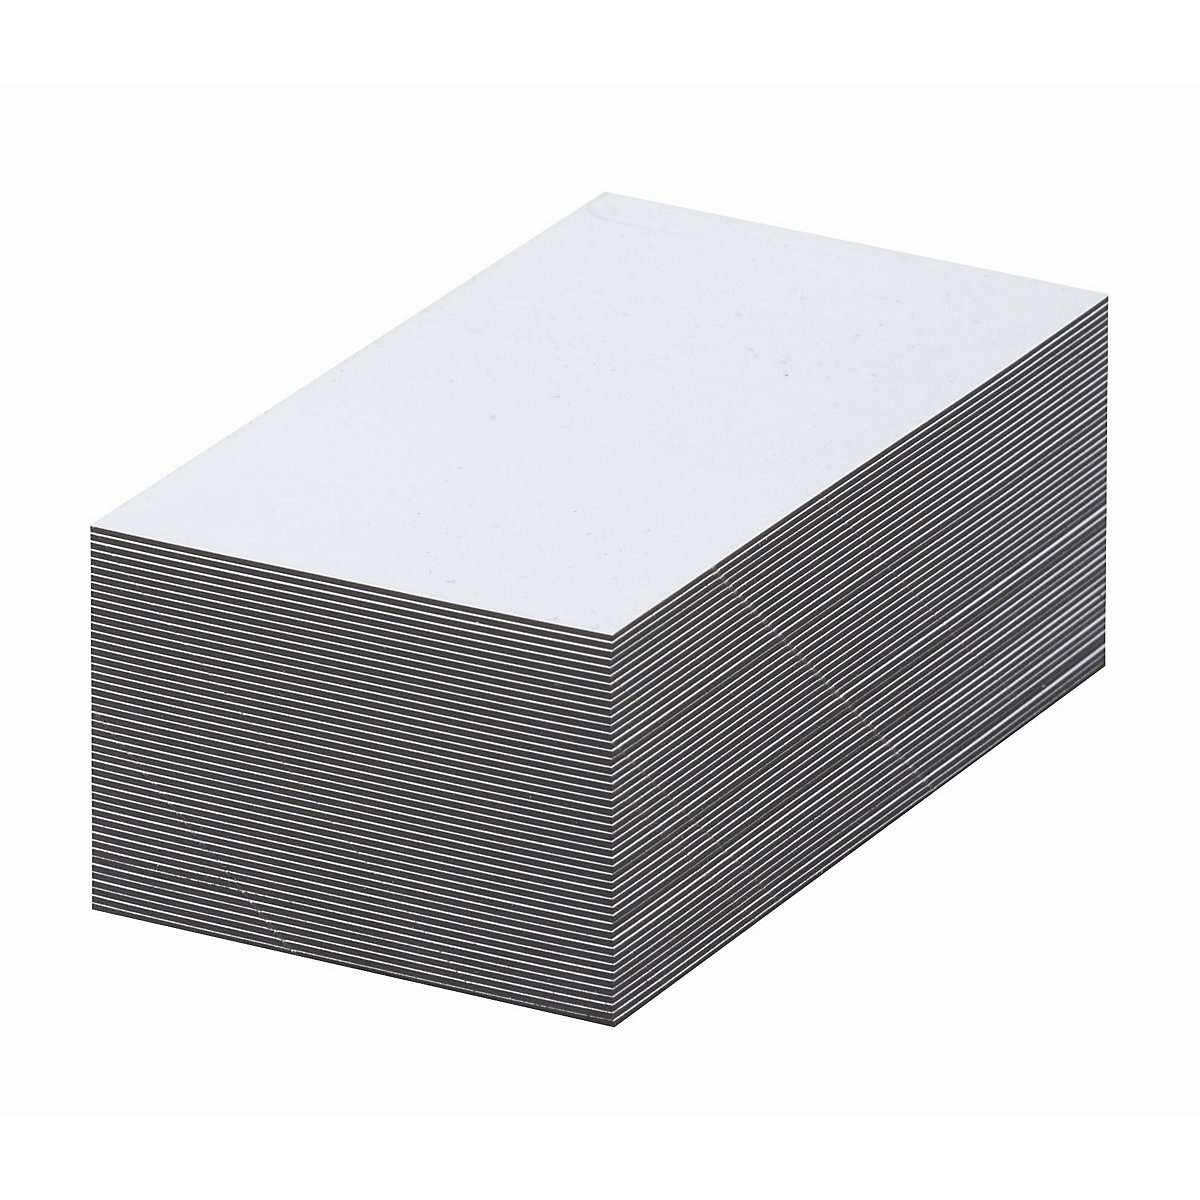 Magnetic storage labels, white, HxW 40 x 100 mm, pack of 100-11